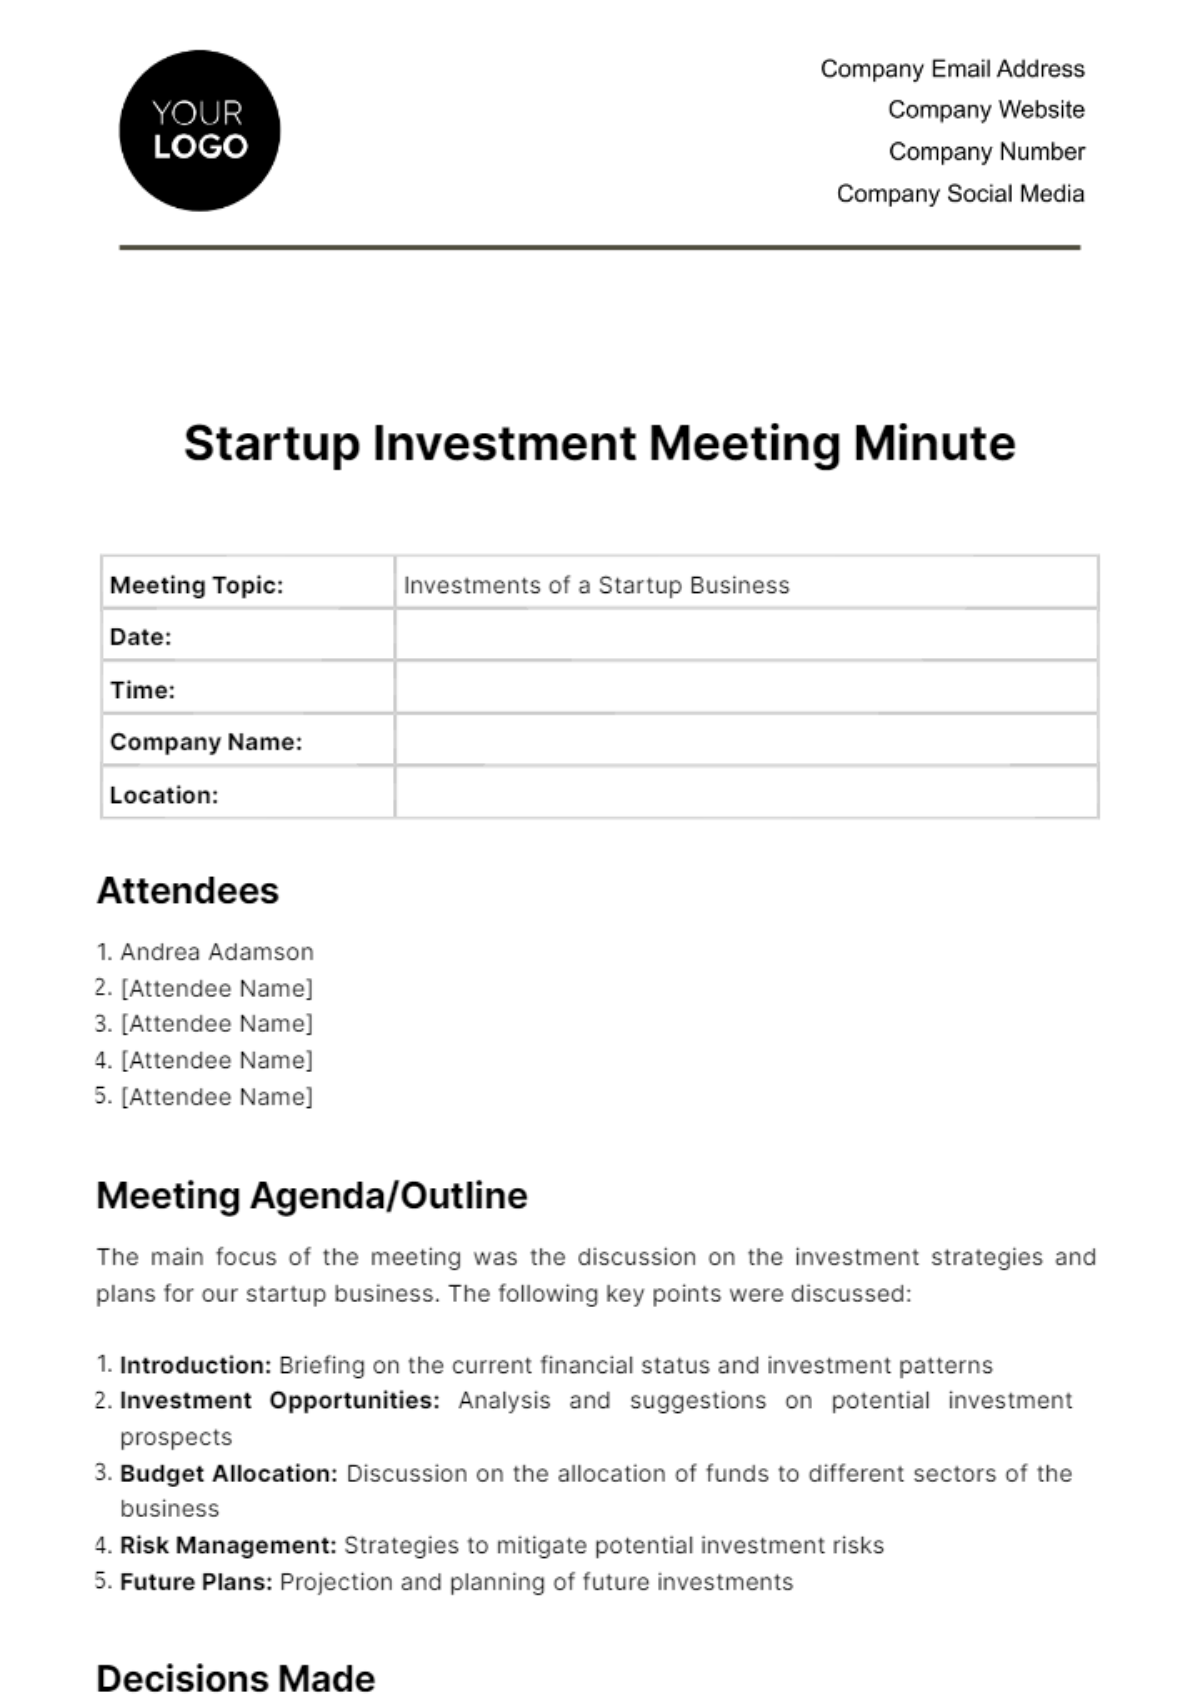 Free Startup Investment Meeting Minute Template